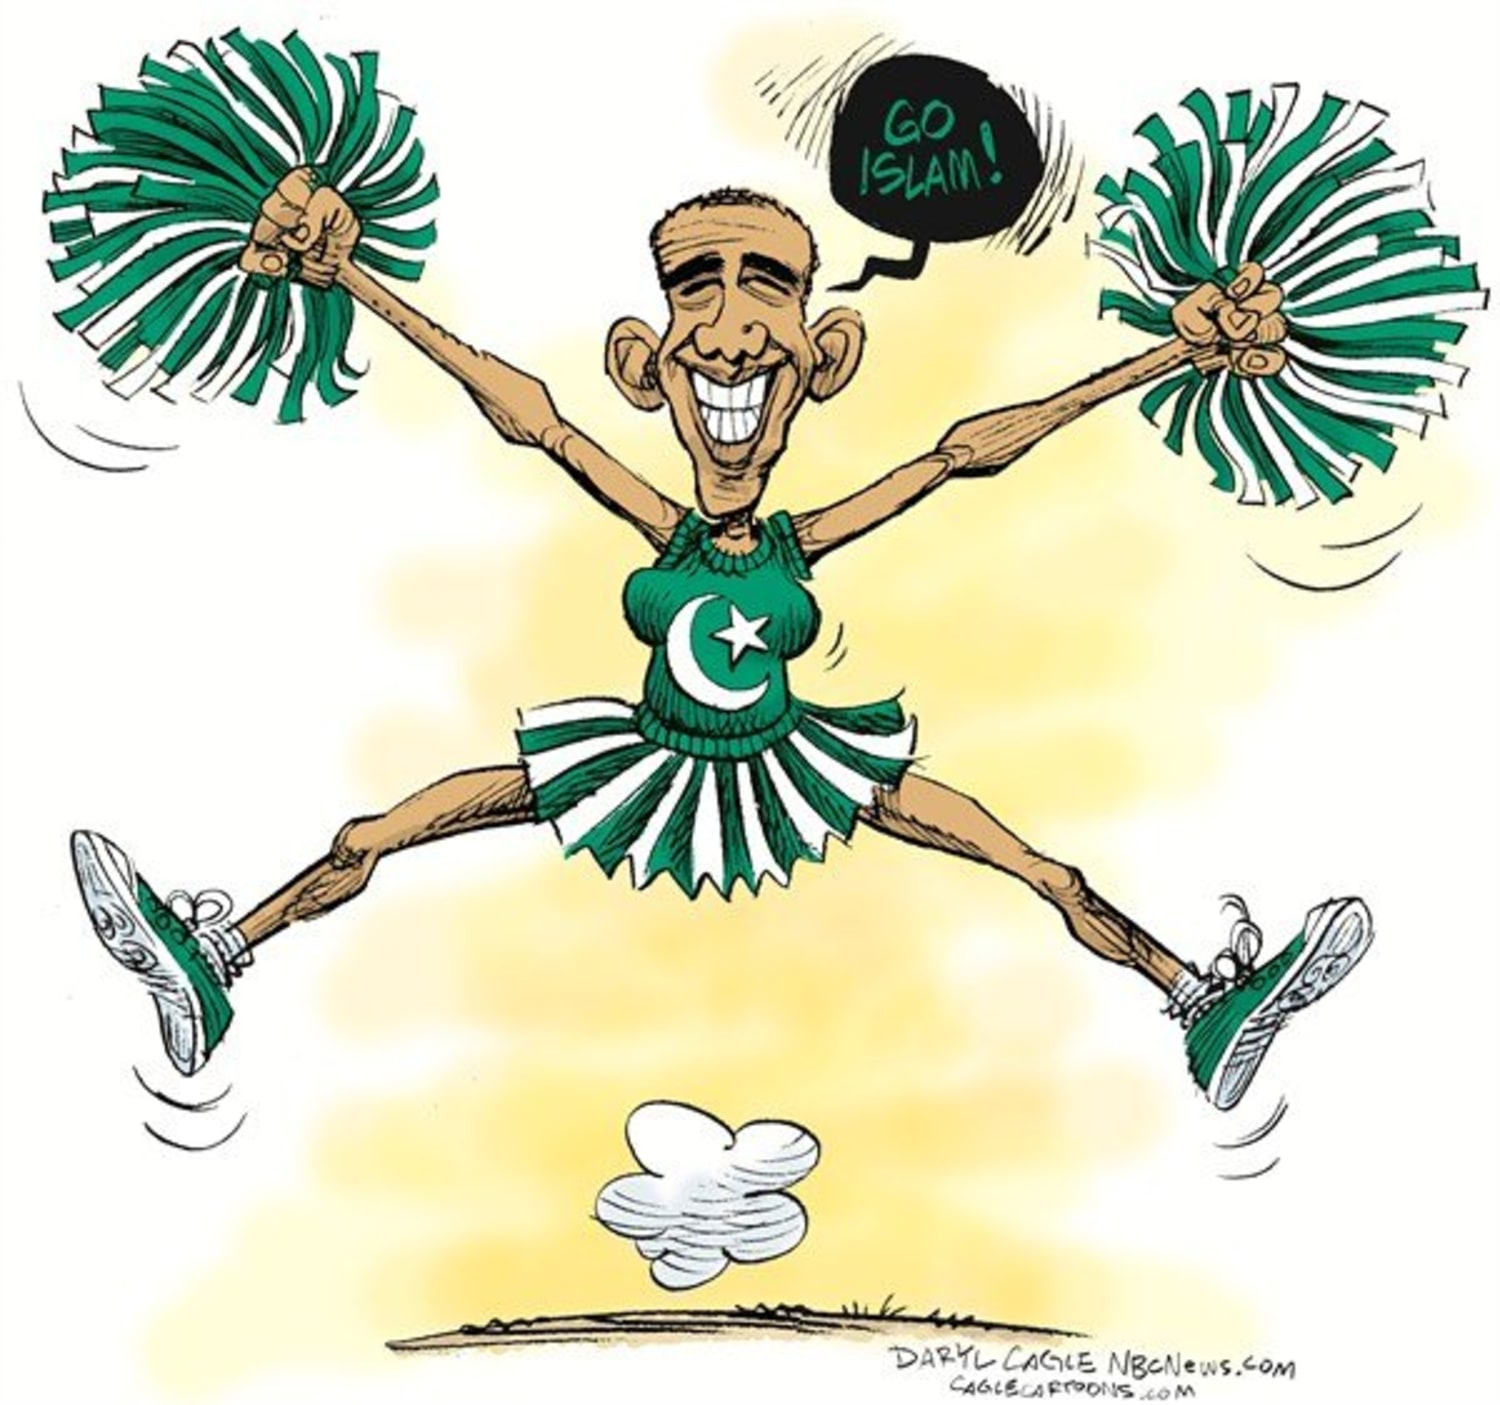 Readers angered by my Obama cartoon